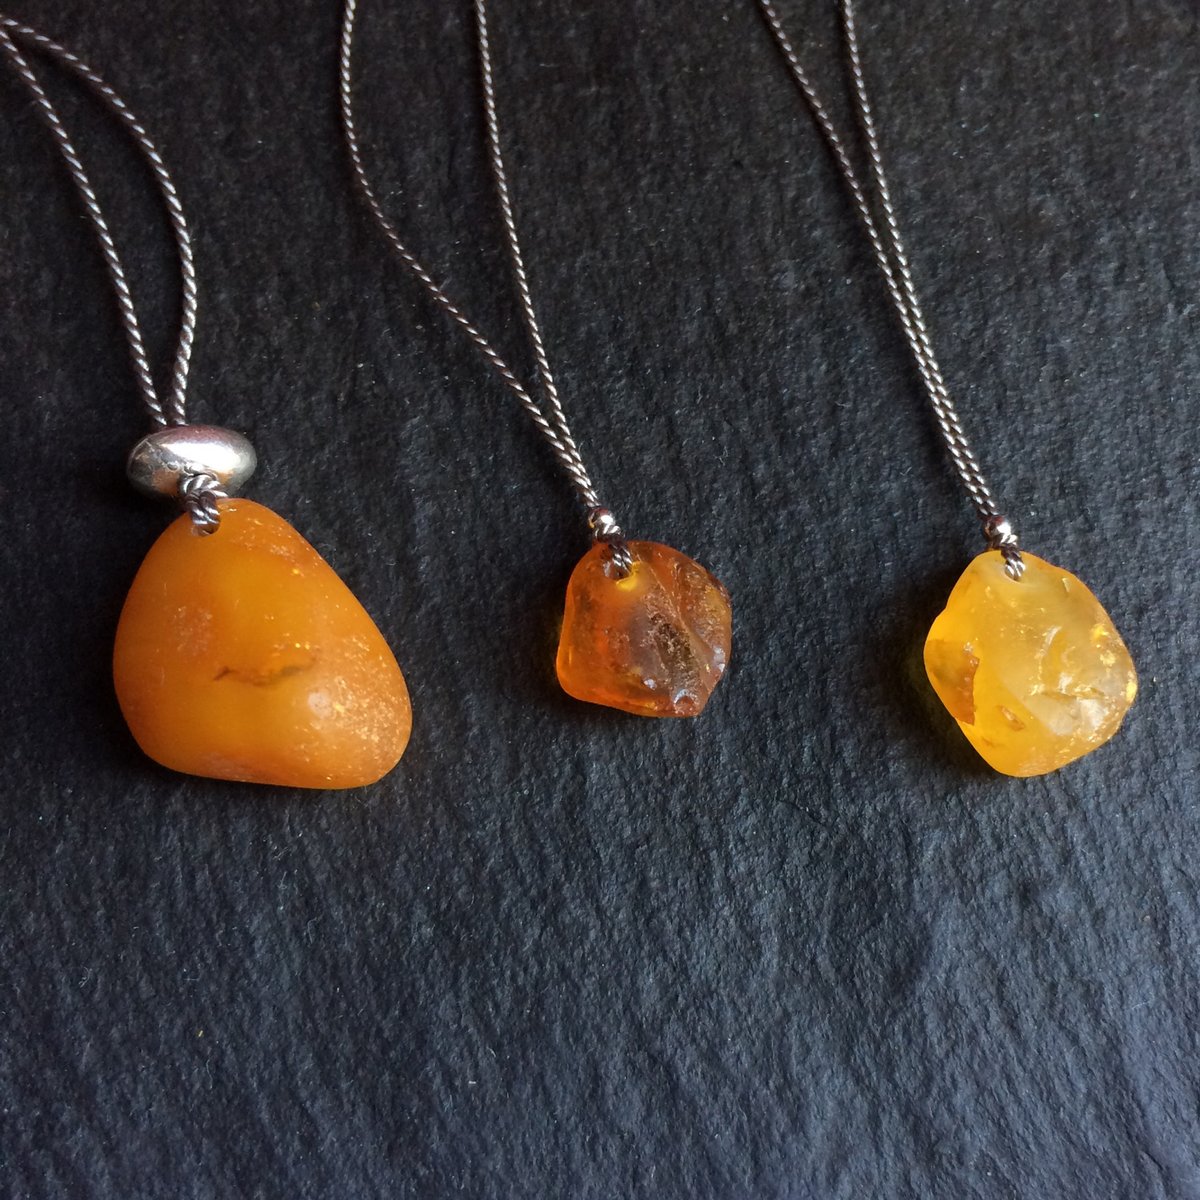 Suffolk Amber necklaces / Sea Glass and Stone - Drawings and Jewellery ...